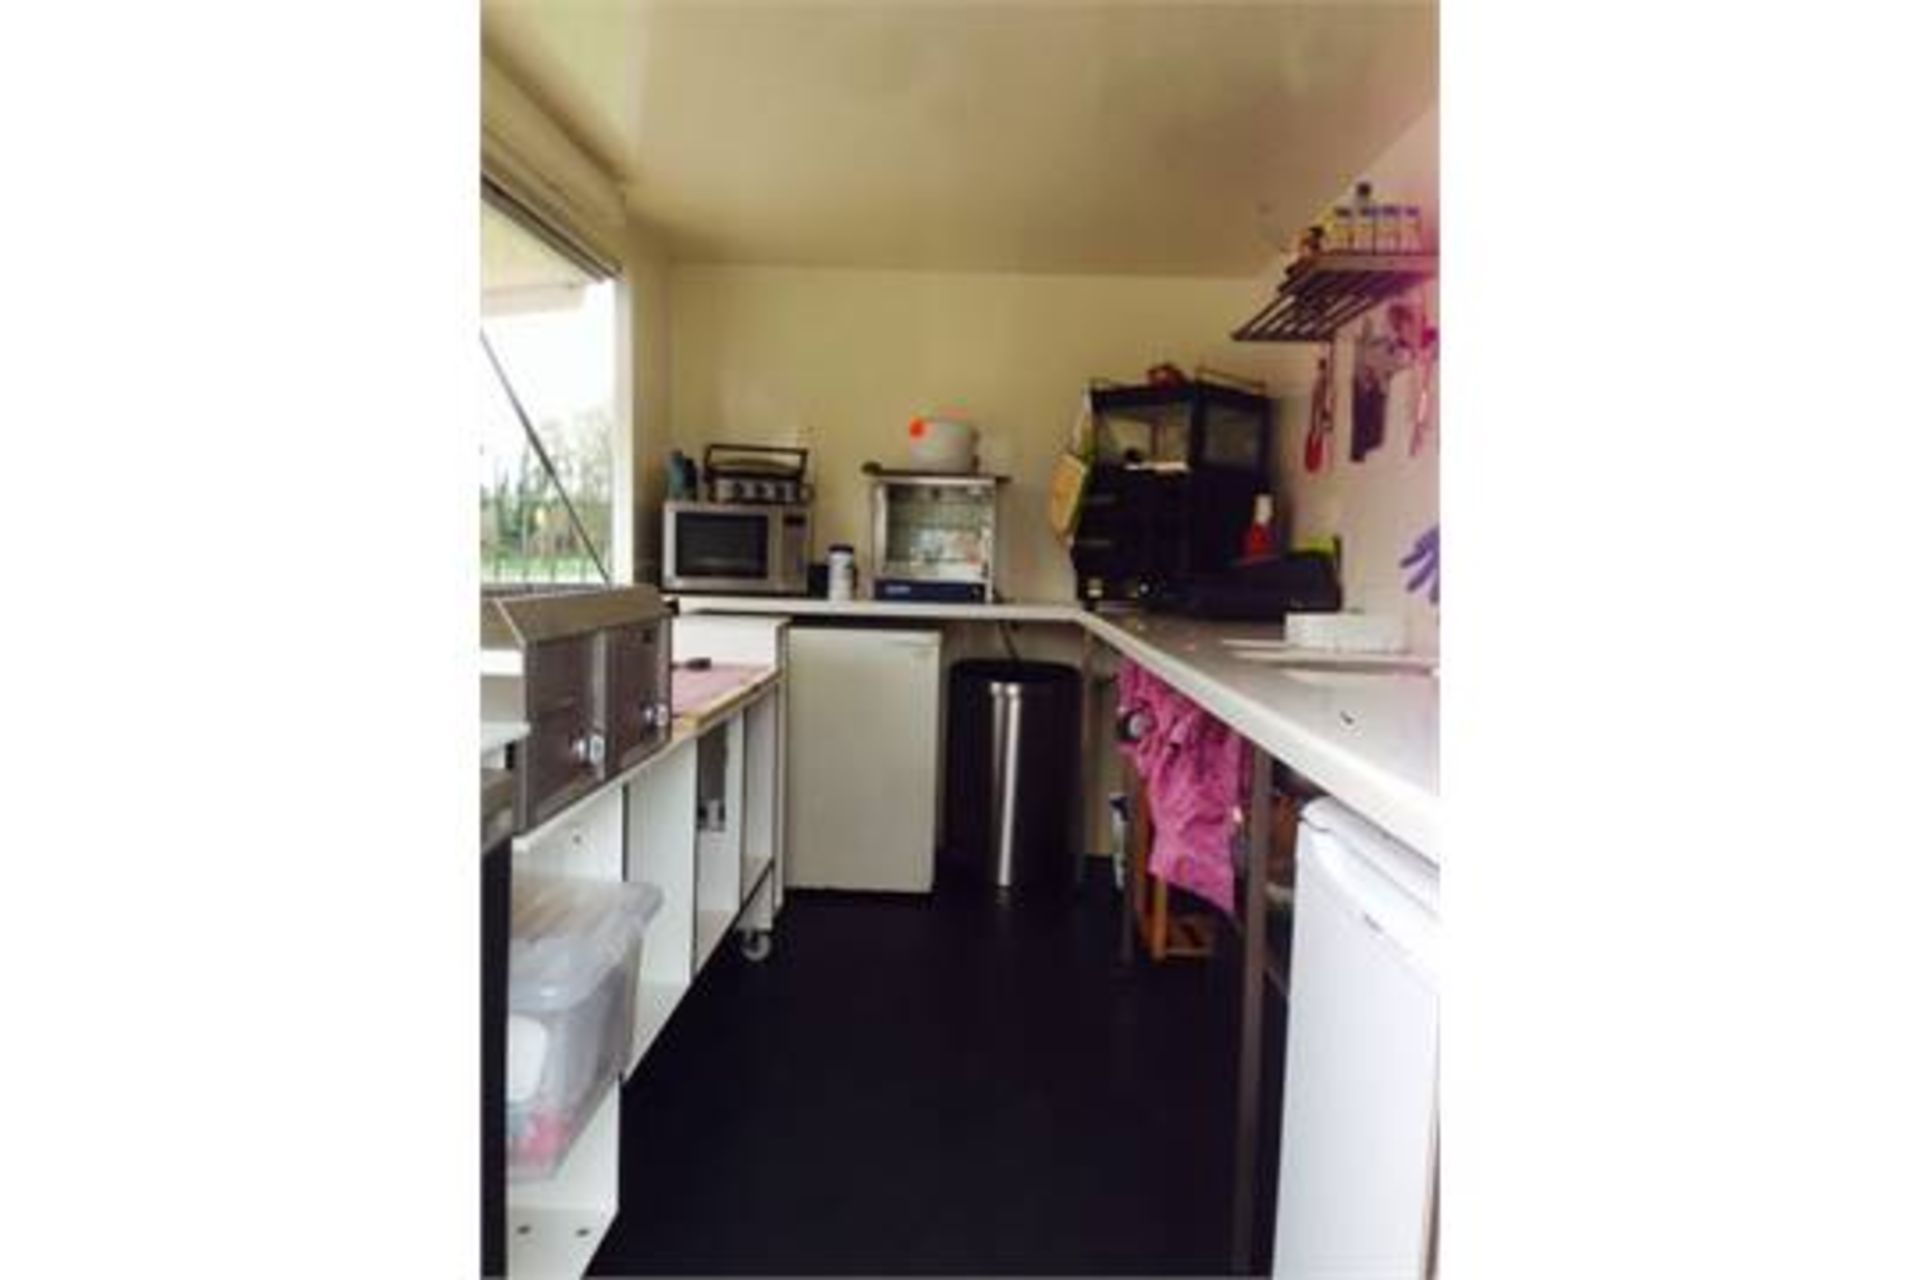 Catering Trailer - Image 14 of 18